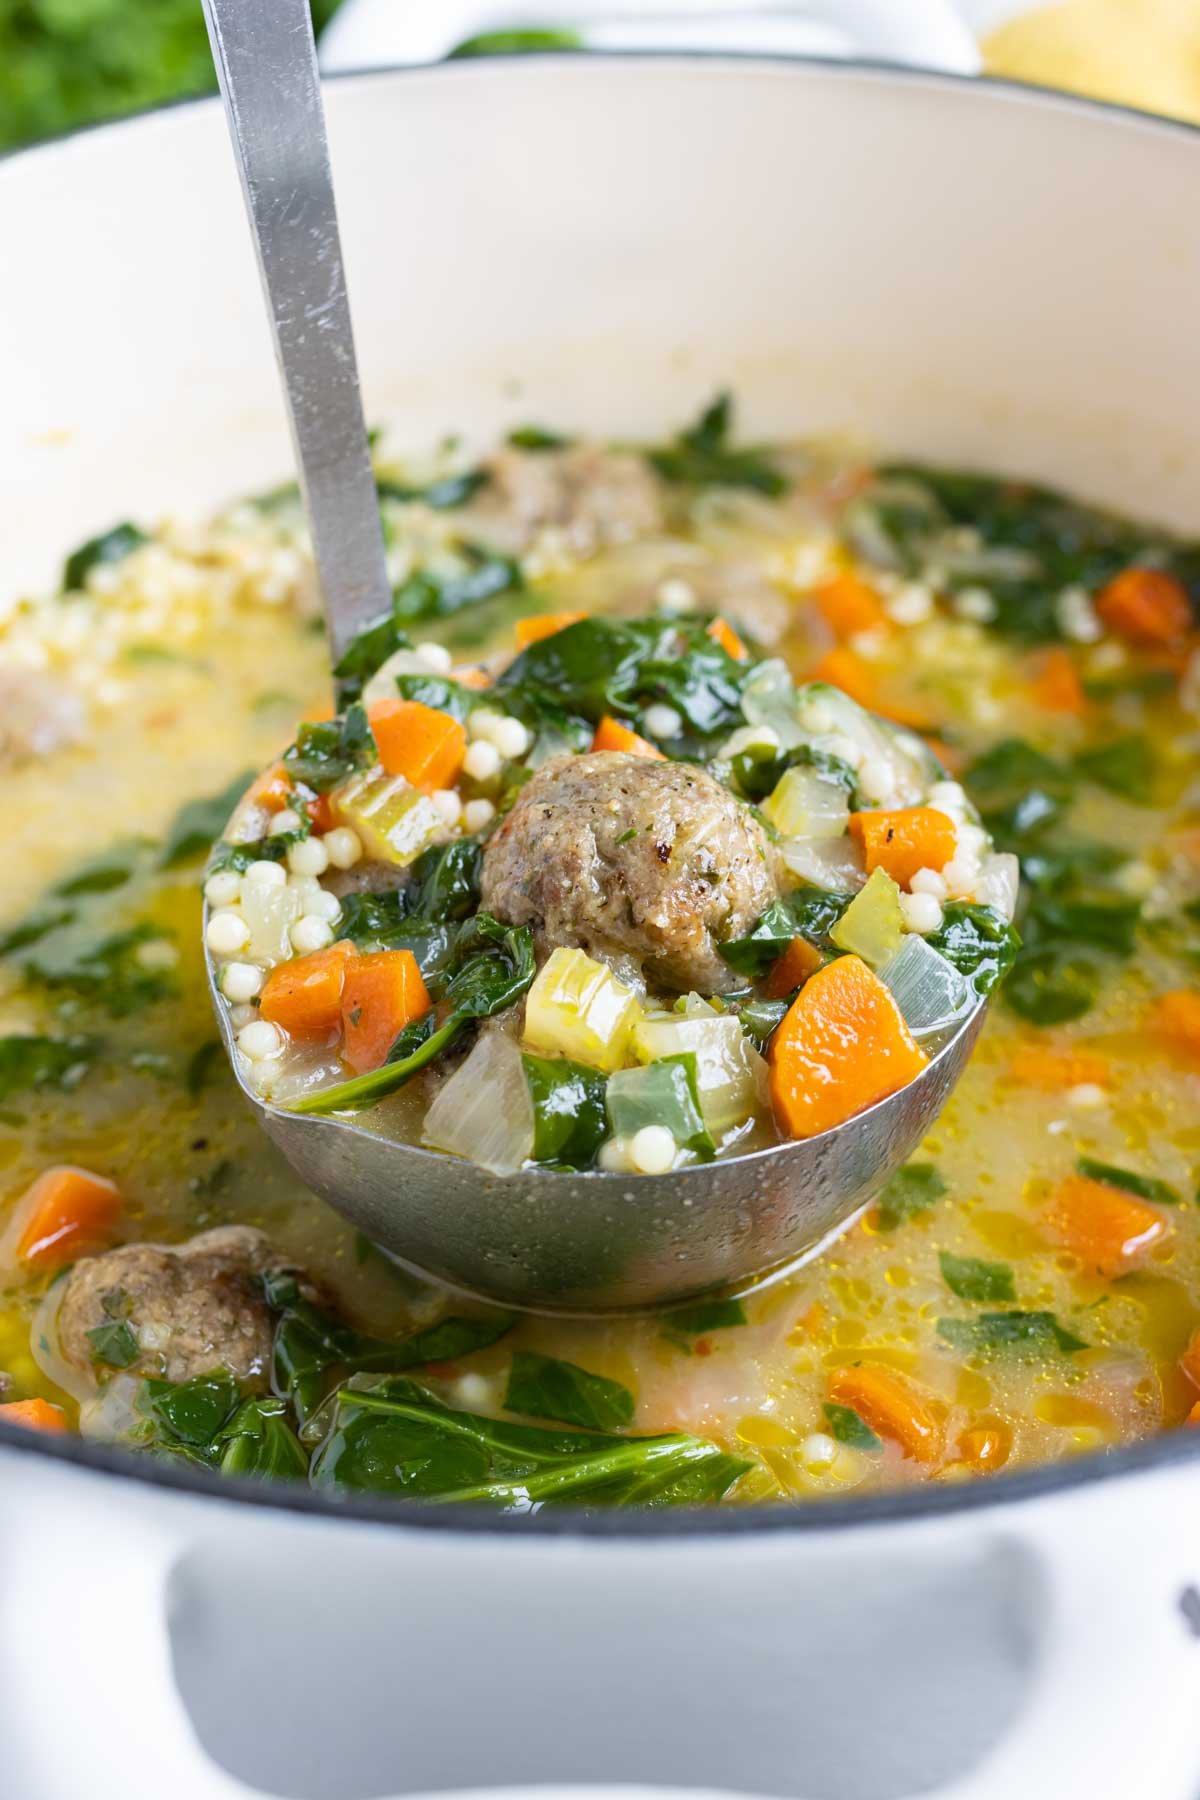 A ladle is shown full of comforting Italian wedding soup.